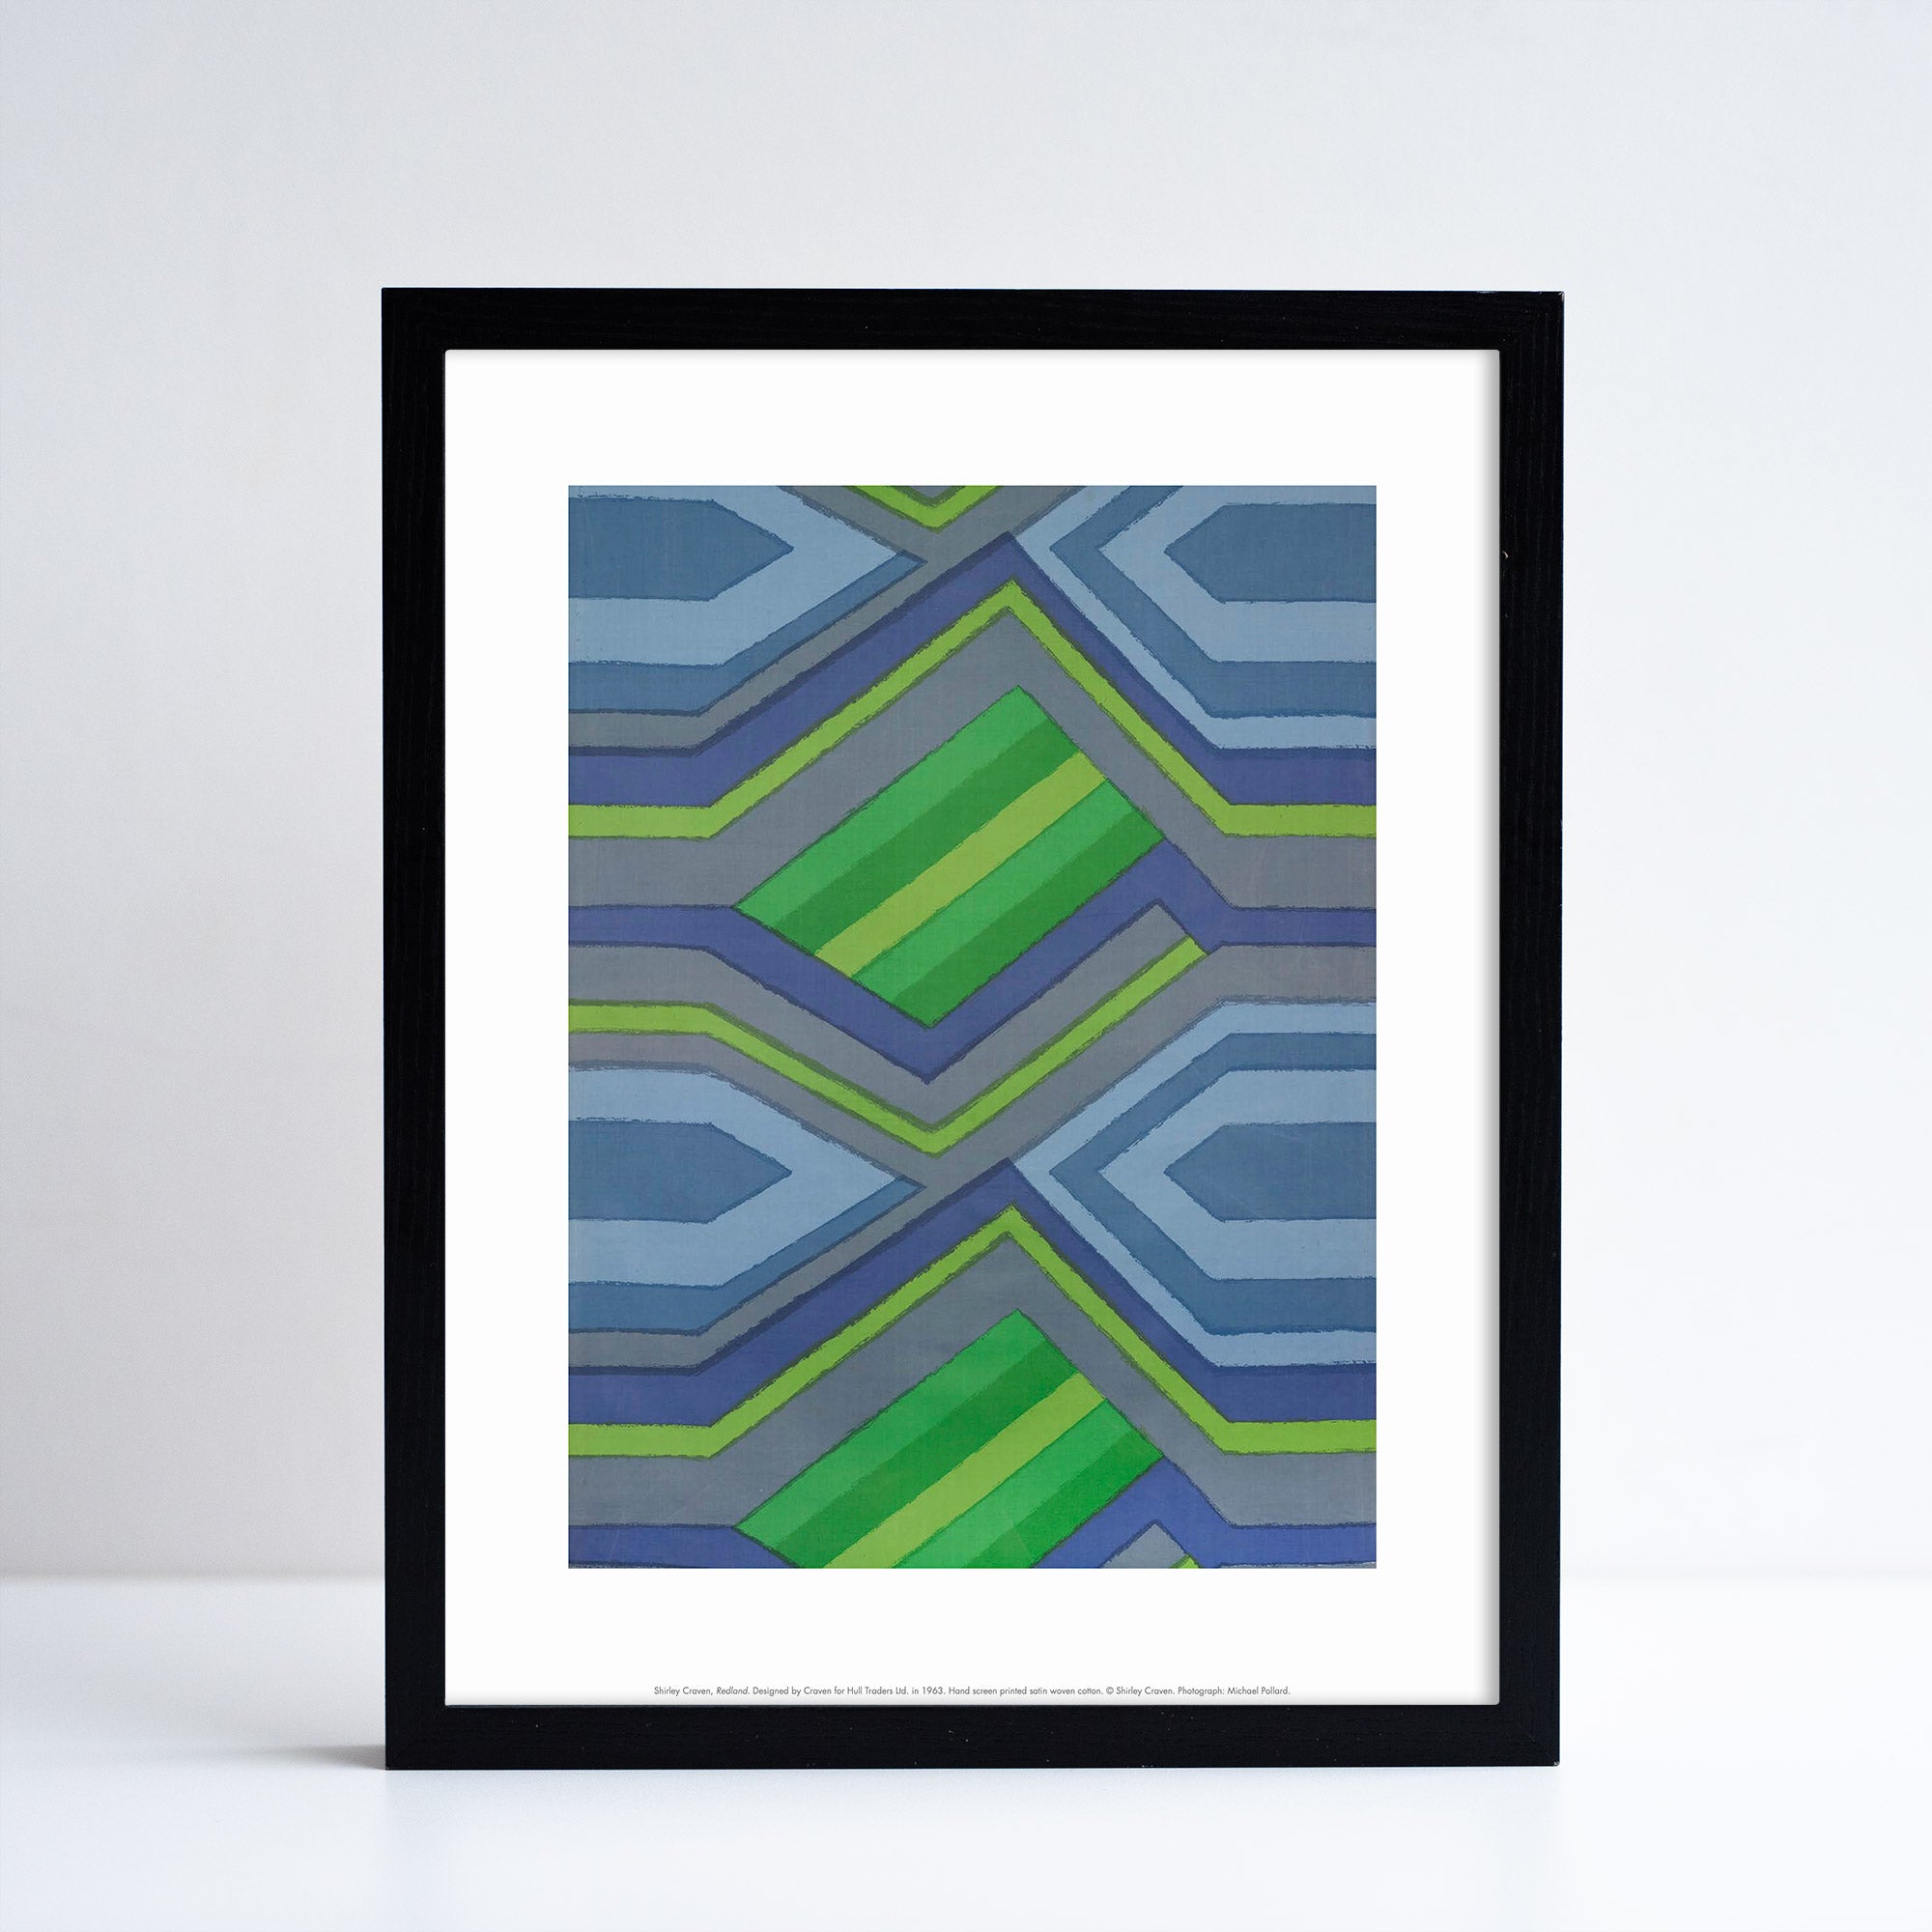 Reproduction of a green and blue geometric textiles piece by Shirley Craven, in print format with a white border. Placed in a black frame in front of a grey background.